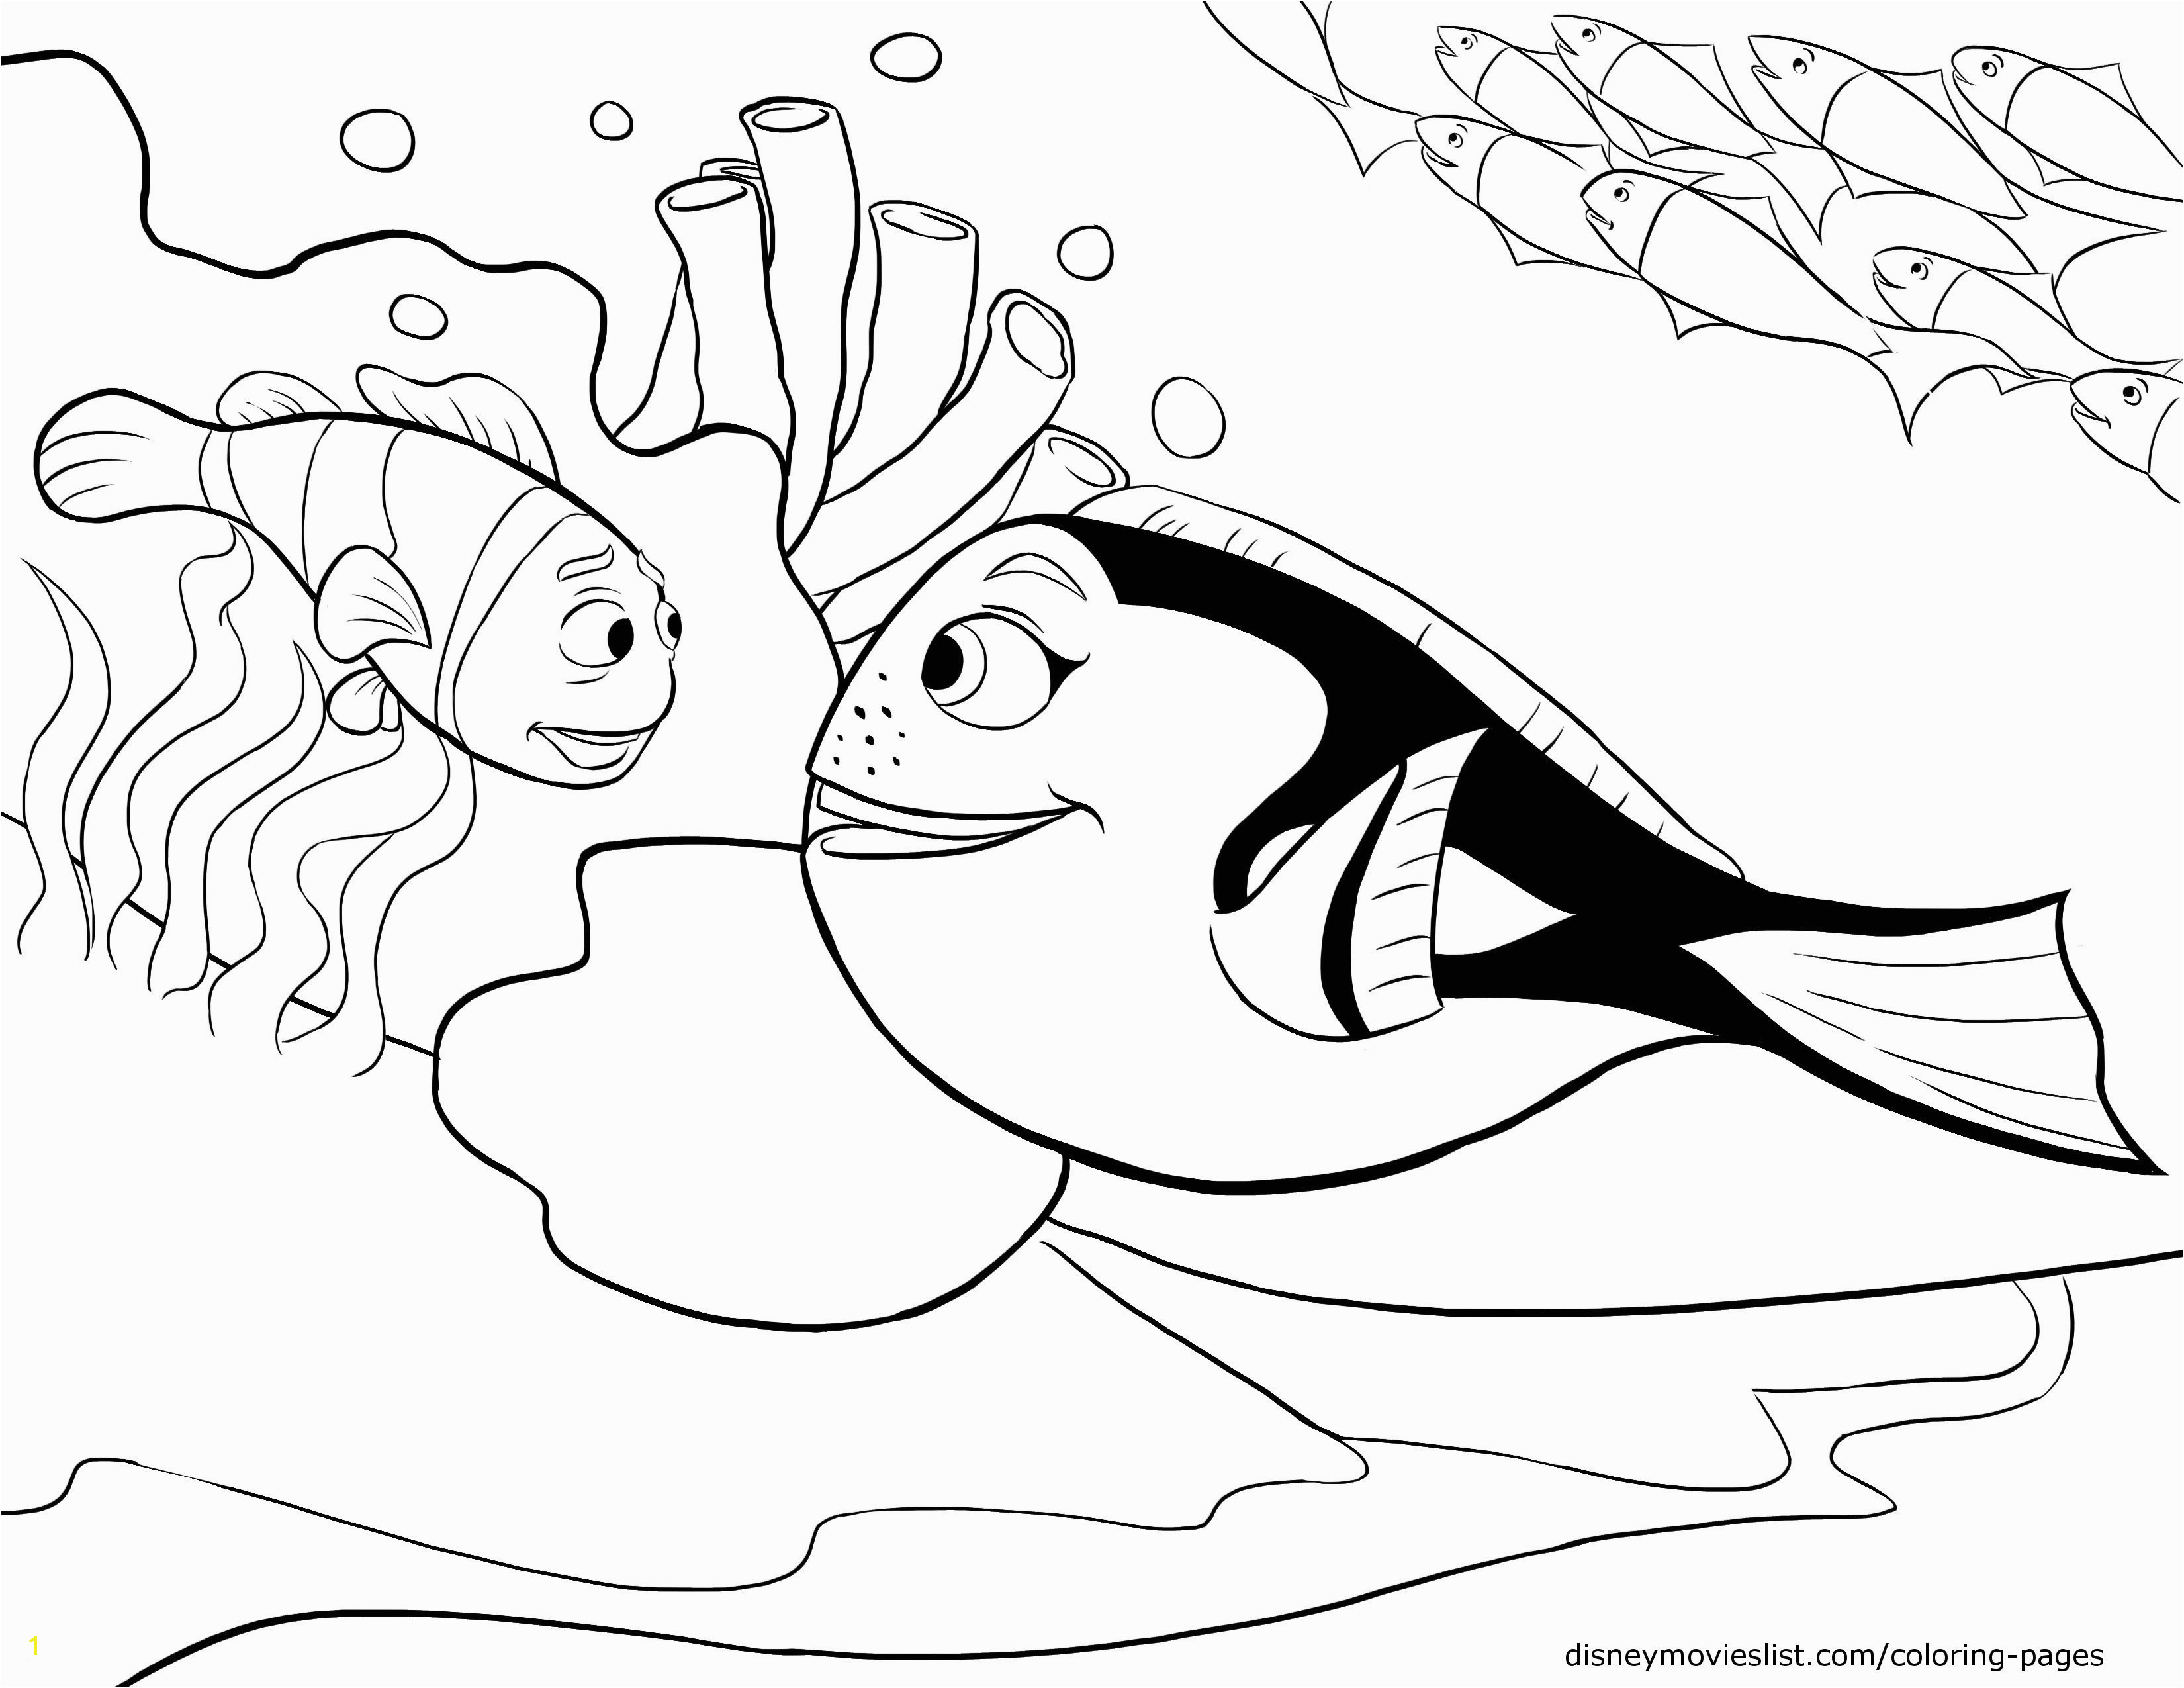 Finding Nemo Coloring Pages Nemo Coloring Pages Lovable Finding Nemo Coloring Pages Beautiful Printable Cds